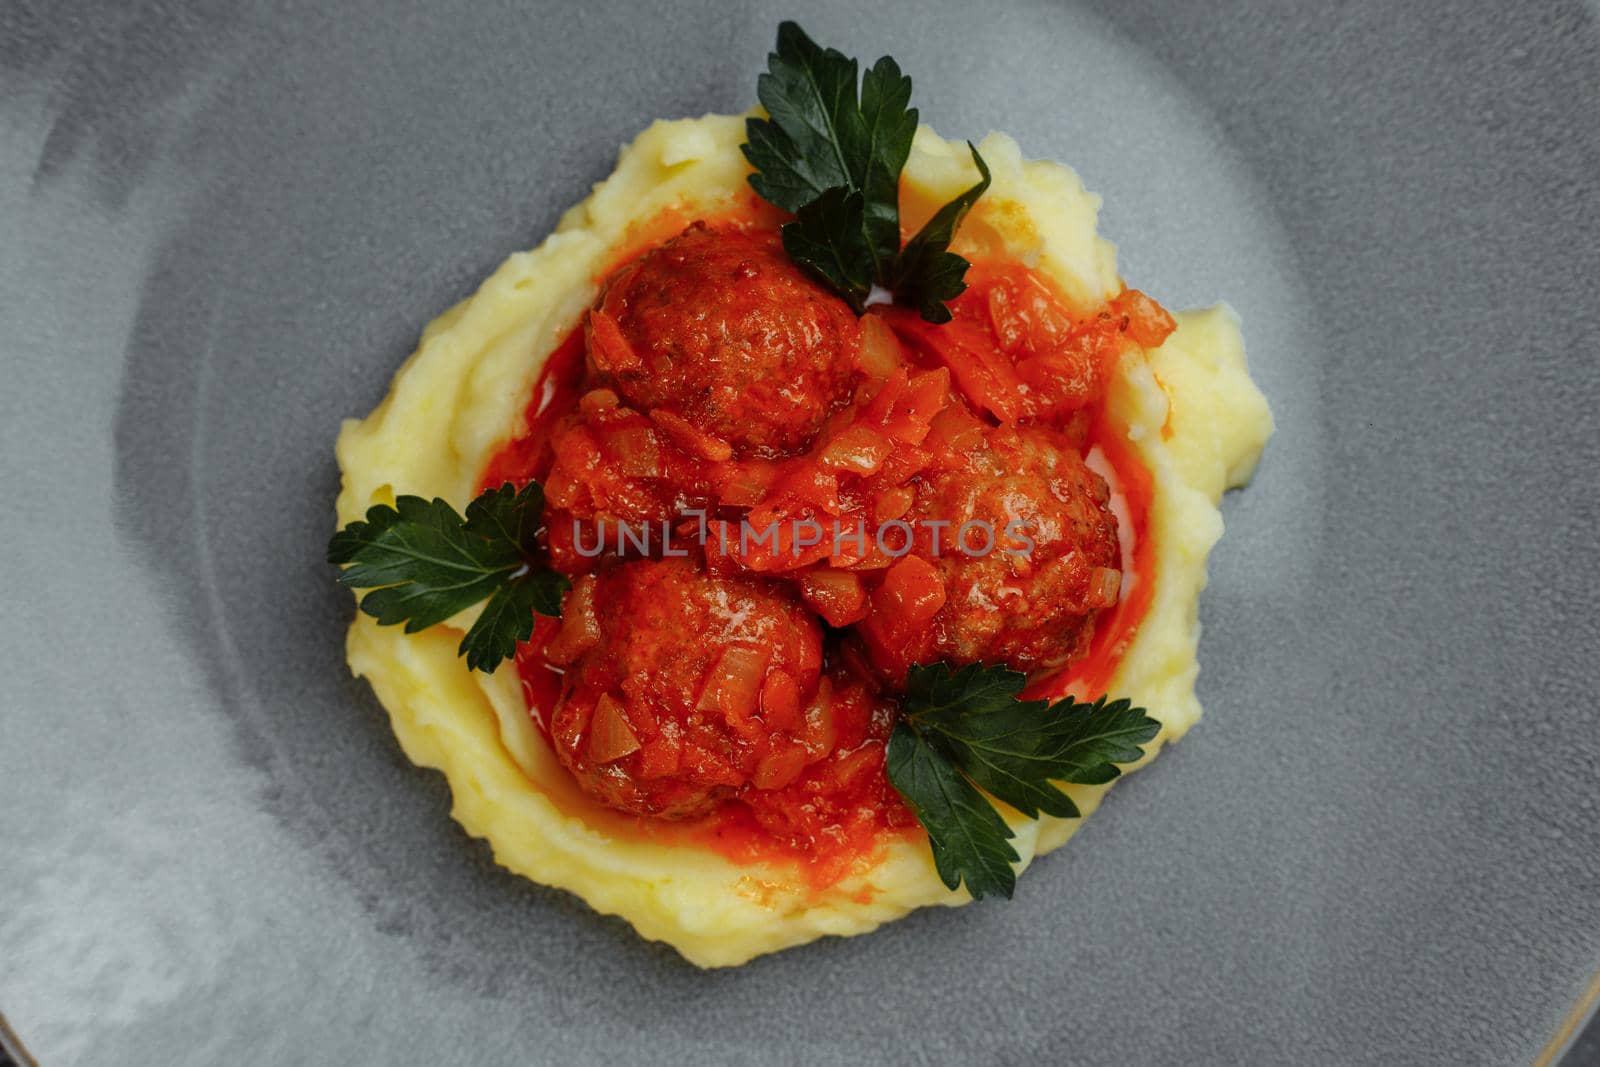 Meatballs in tomato sauce with mashed potato on the white plate, top view, view from above.